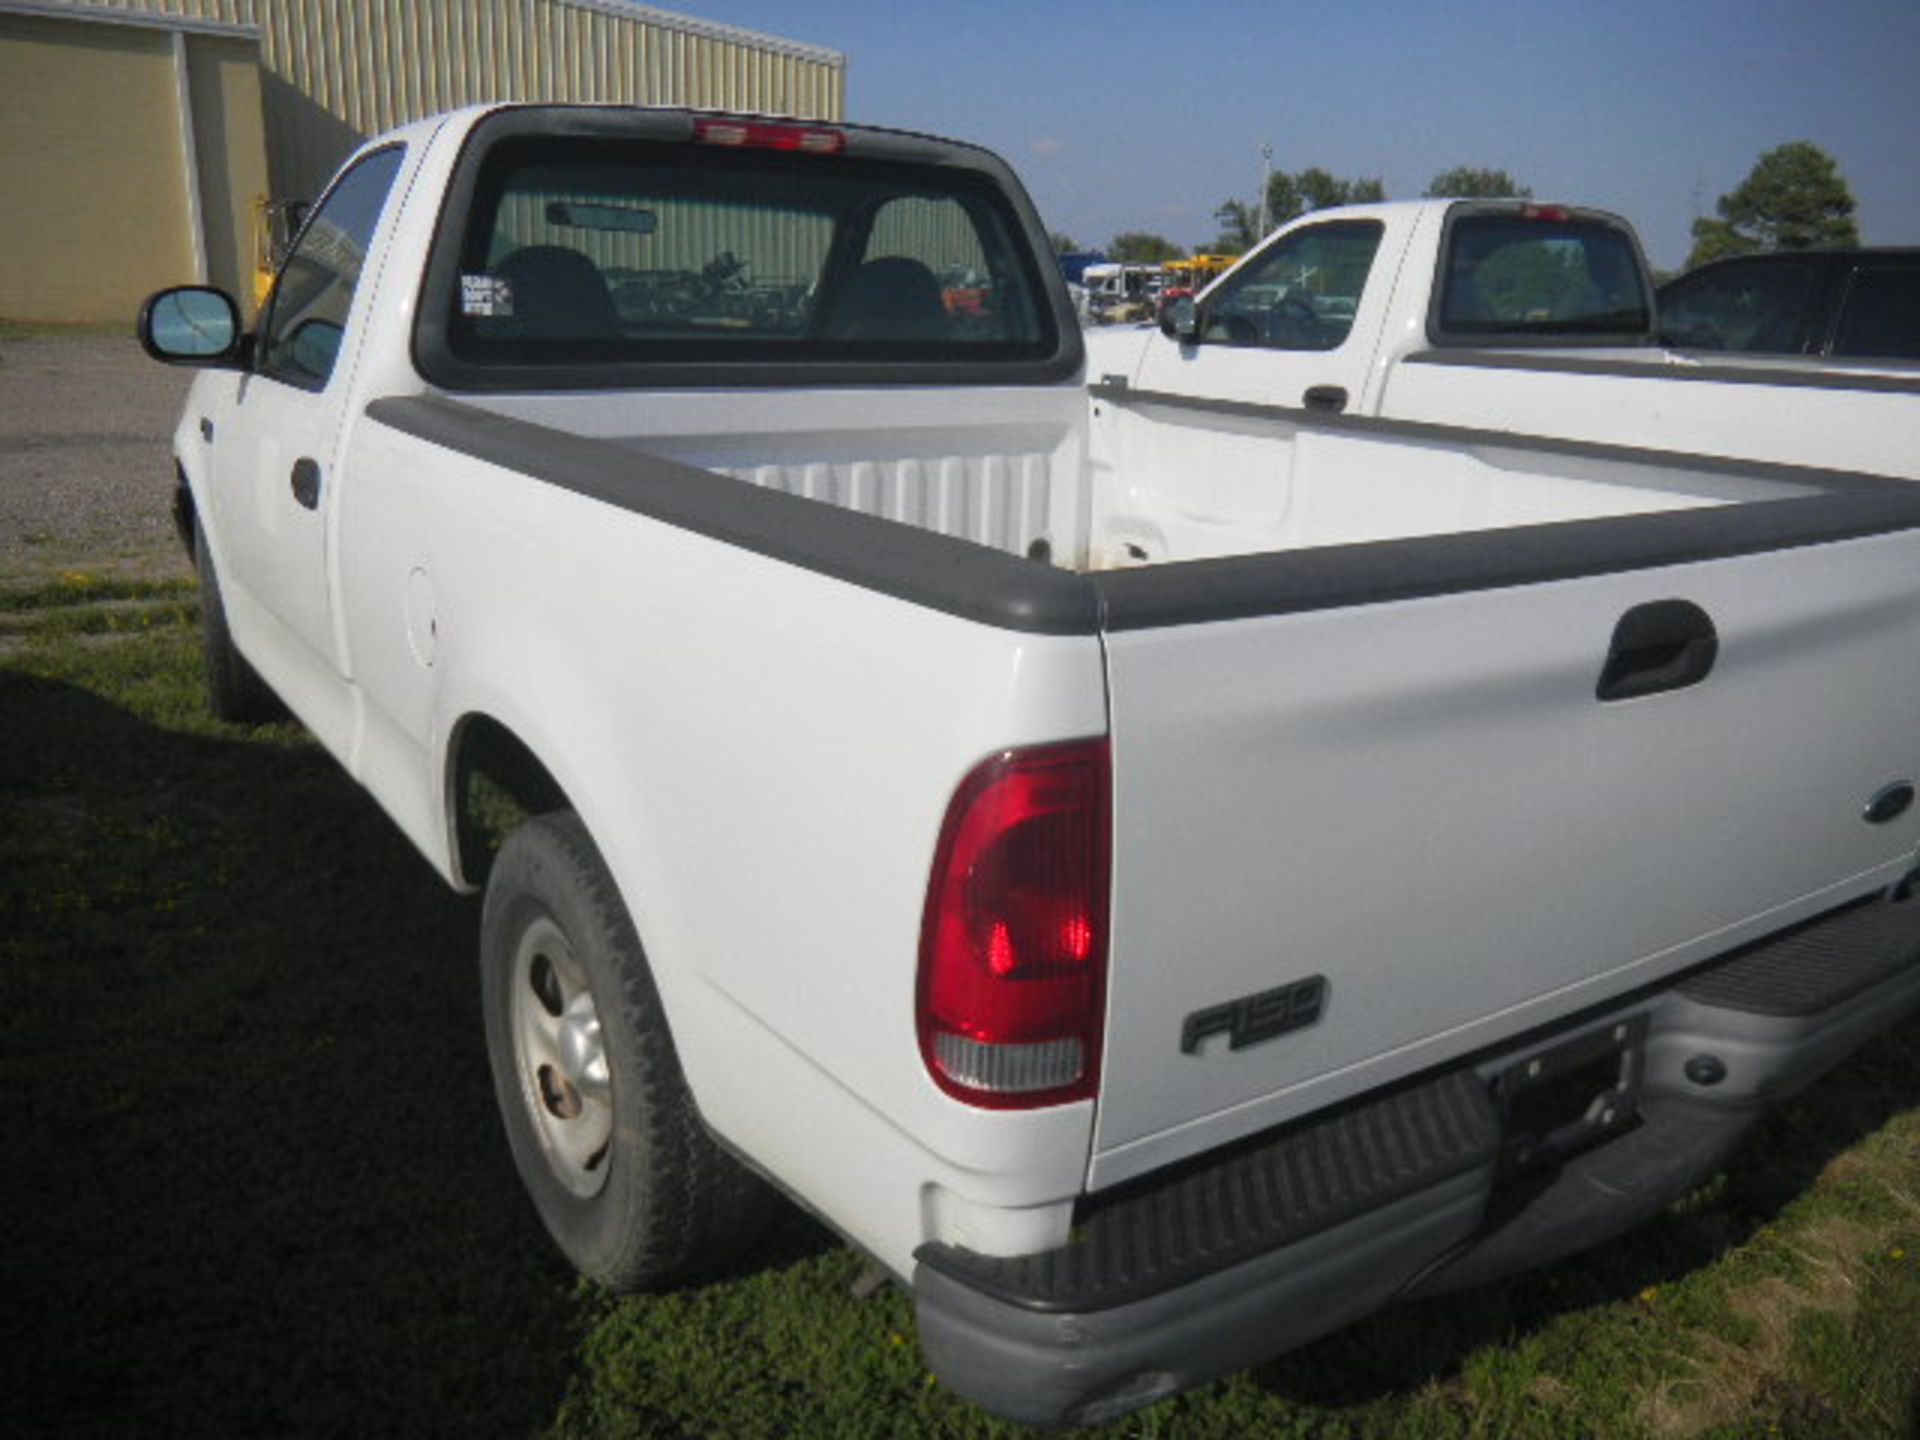 2004 Ford F-150 XL Pickup Truck - Asset I.D. #Un-Known - Last of Vin (CA81704) - Image 3 of 7